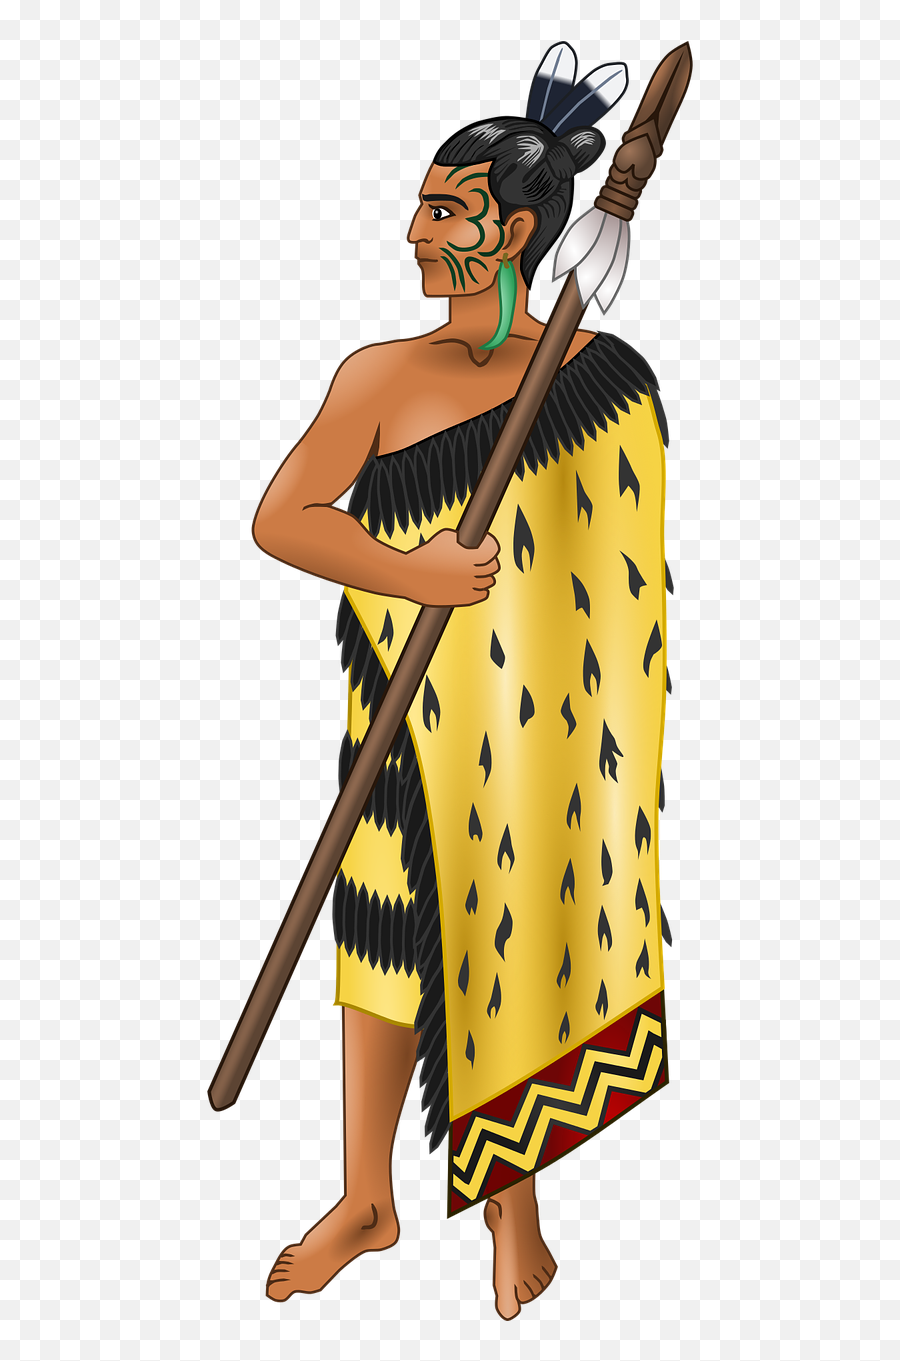 Maori Soldier Spear - Free Vector Graphic On Pixabay Maori Warrior Png,Spear Png